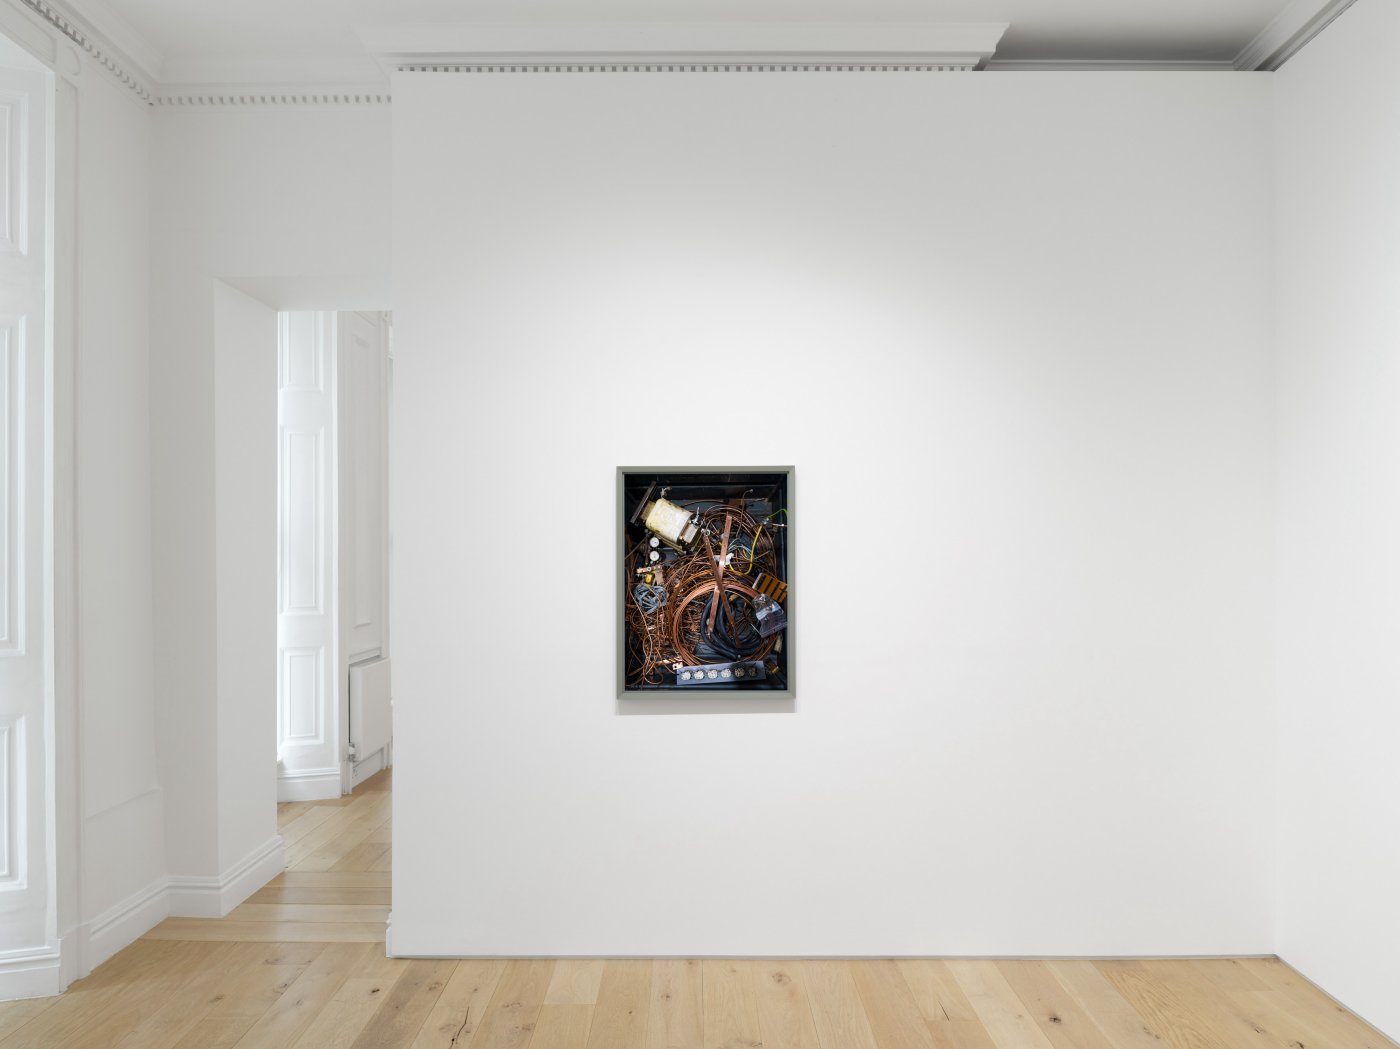 Installation image for Thomas Struth, at Galerie Max Hetzler